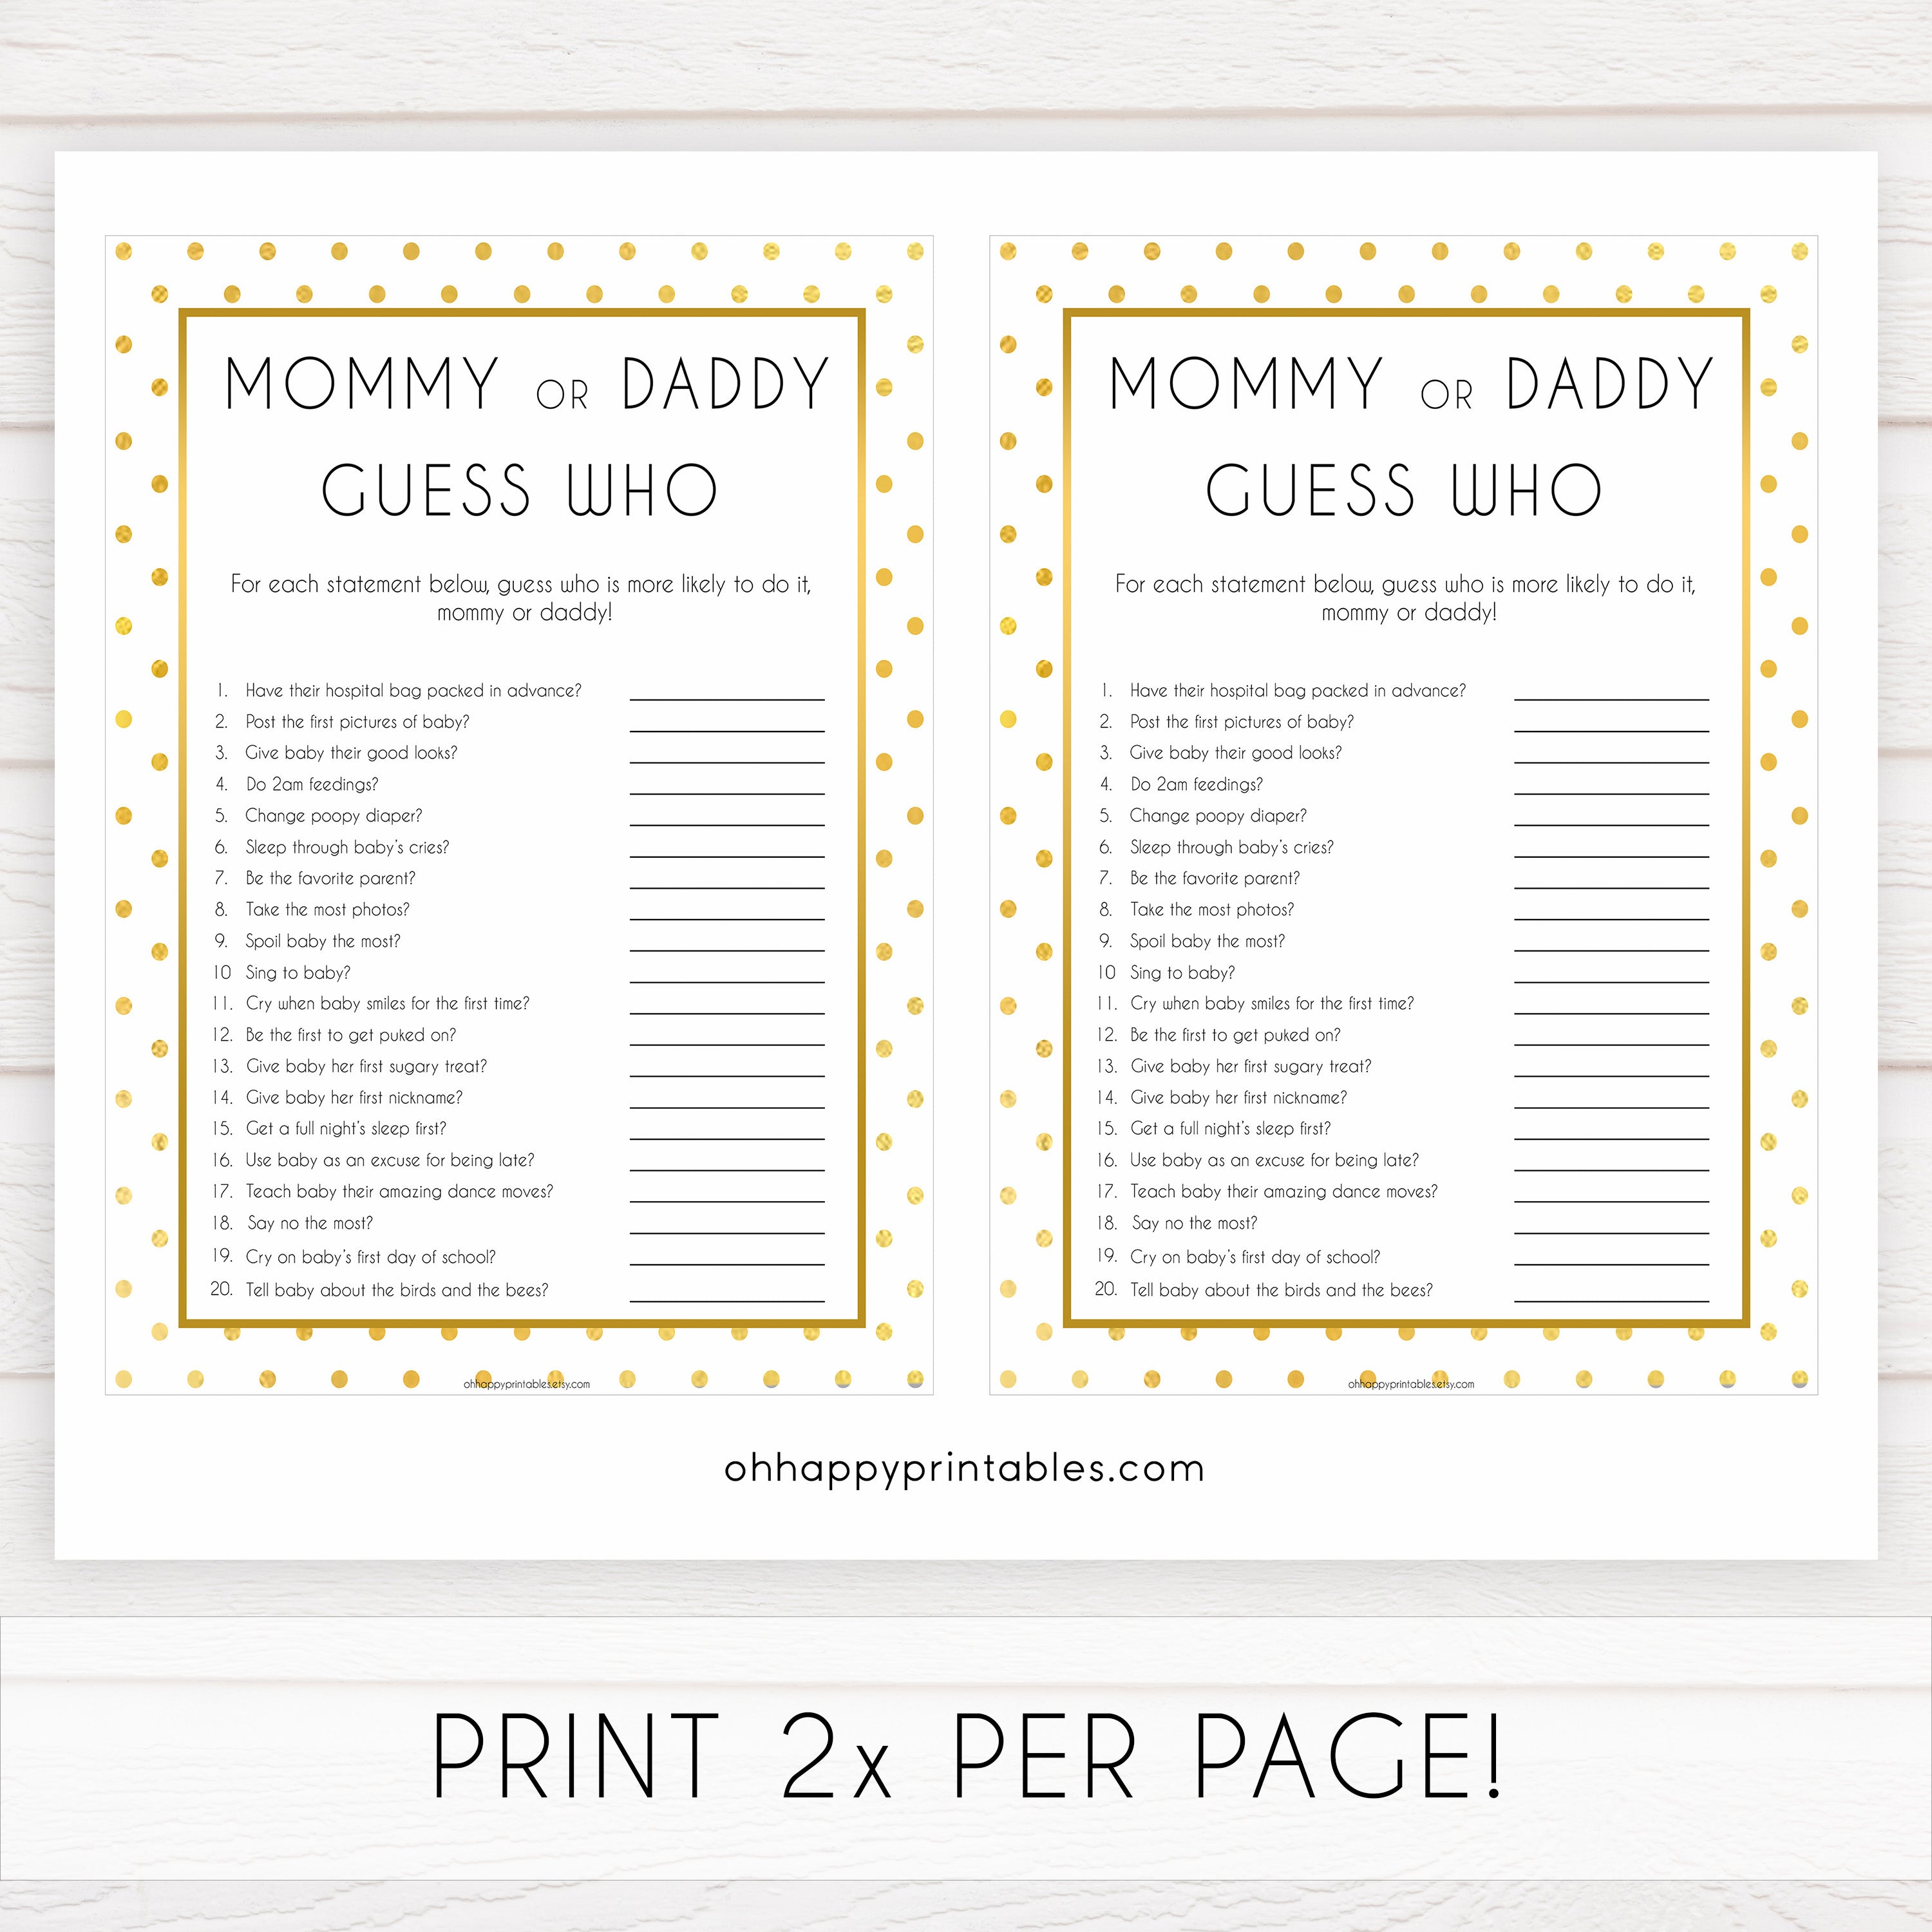 mommy or daddy guess who, guess who baby game, Printable baby shower games, baby gold dots fun baby games, baby shower games, fun baby shower ideas, top baby shower ideas, gold glitter shower baby shower, friends baby shower ideas